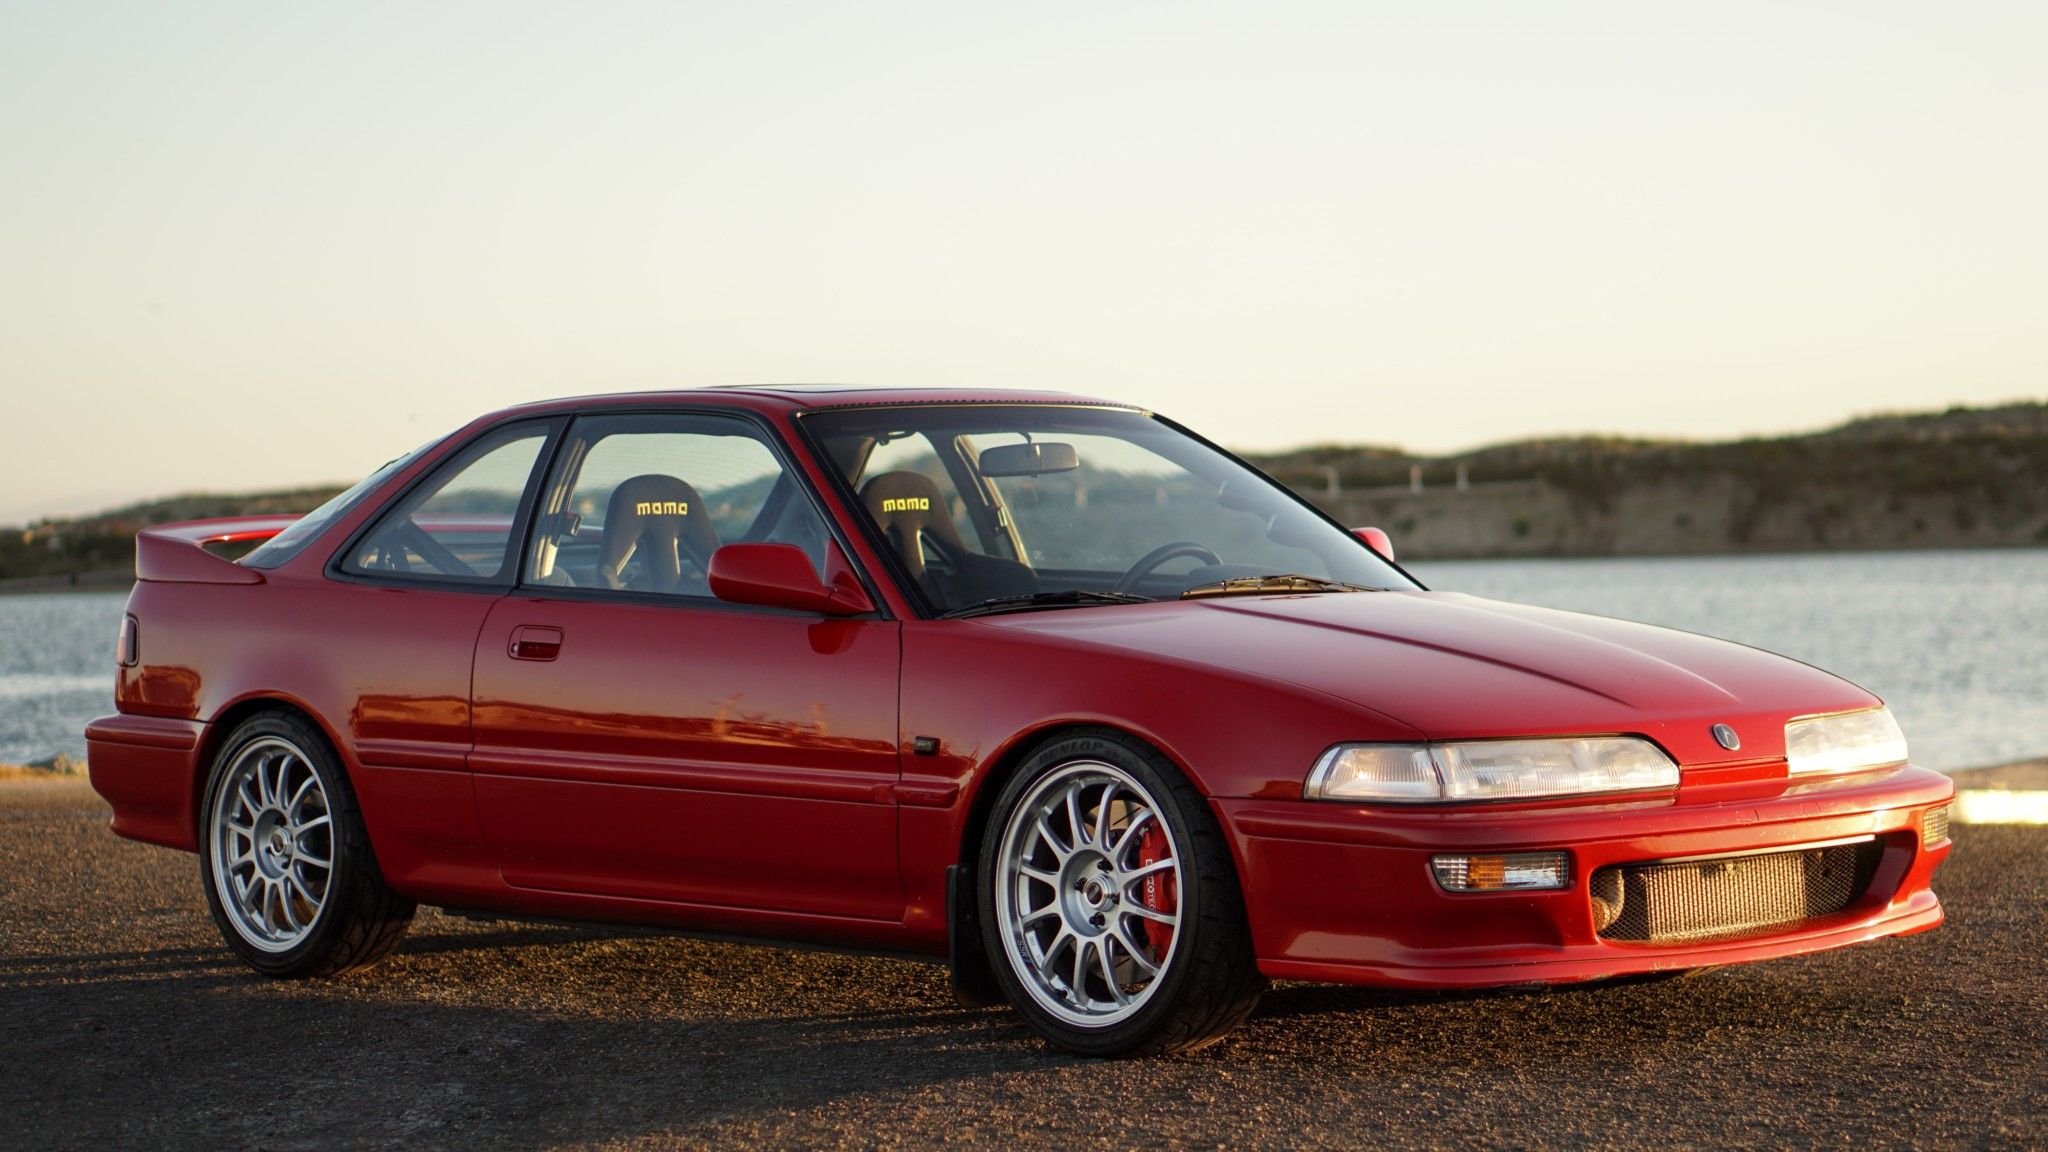 1992 Acura Integra: The sports car for all ages.